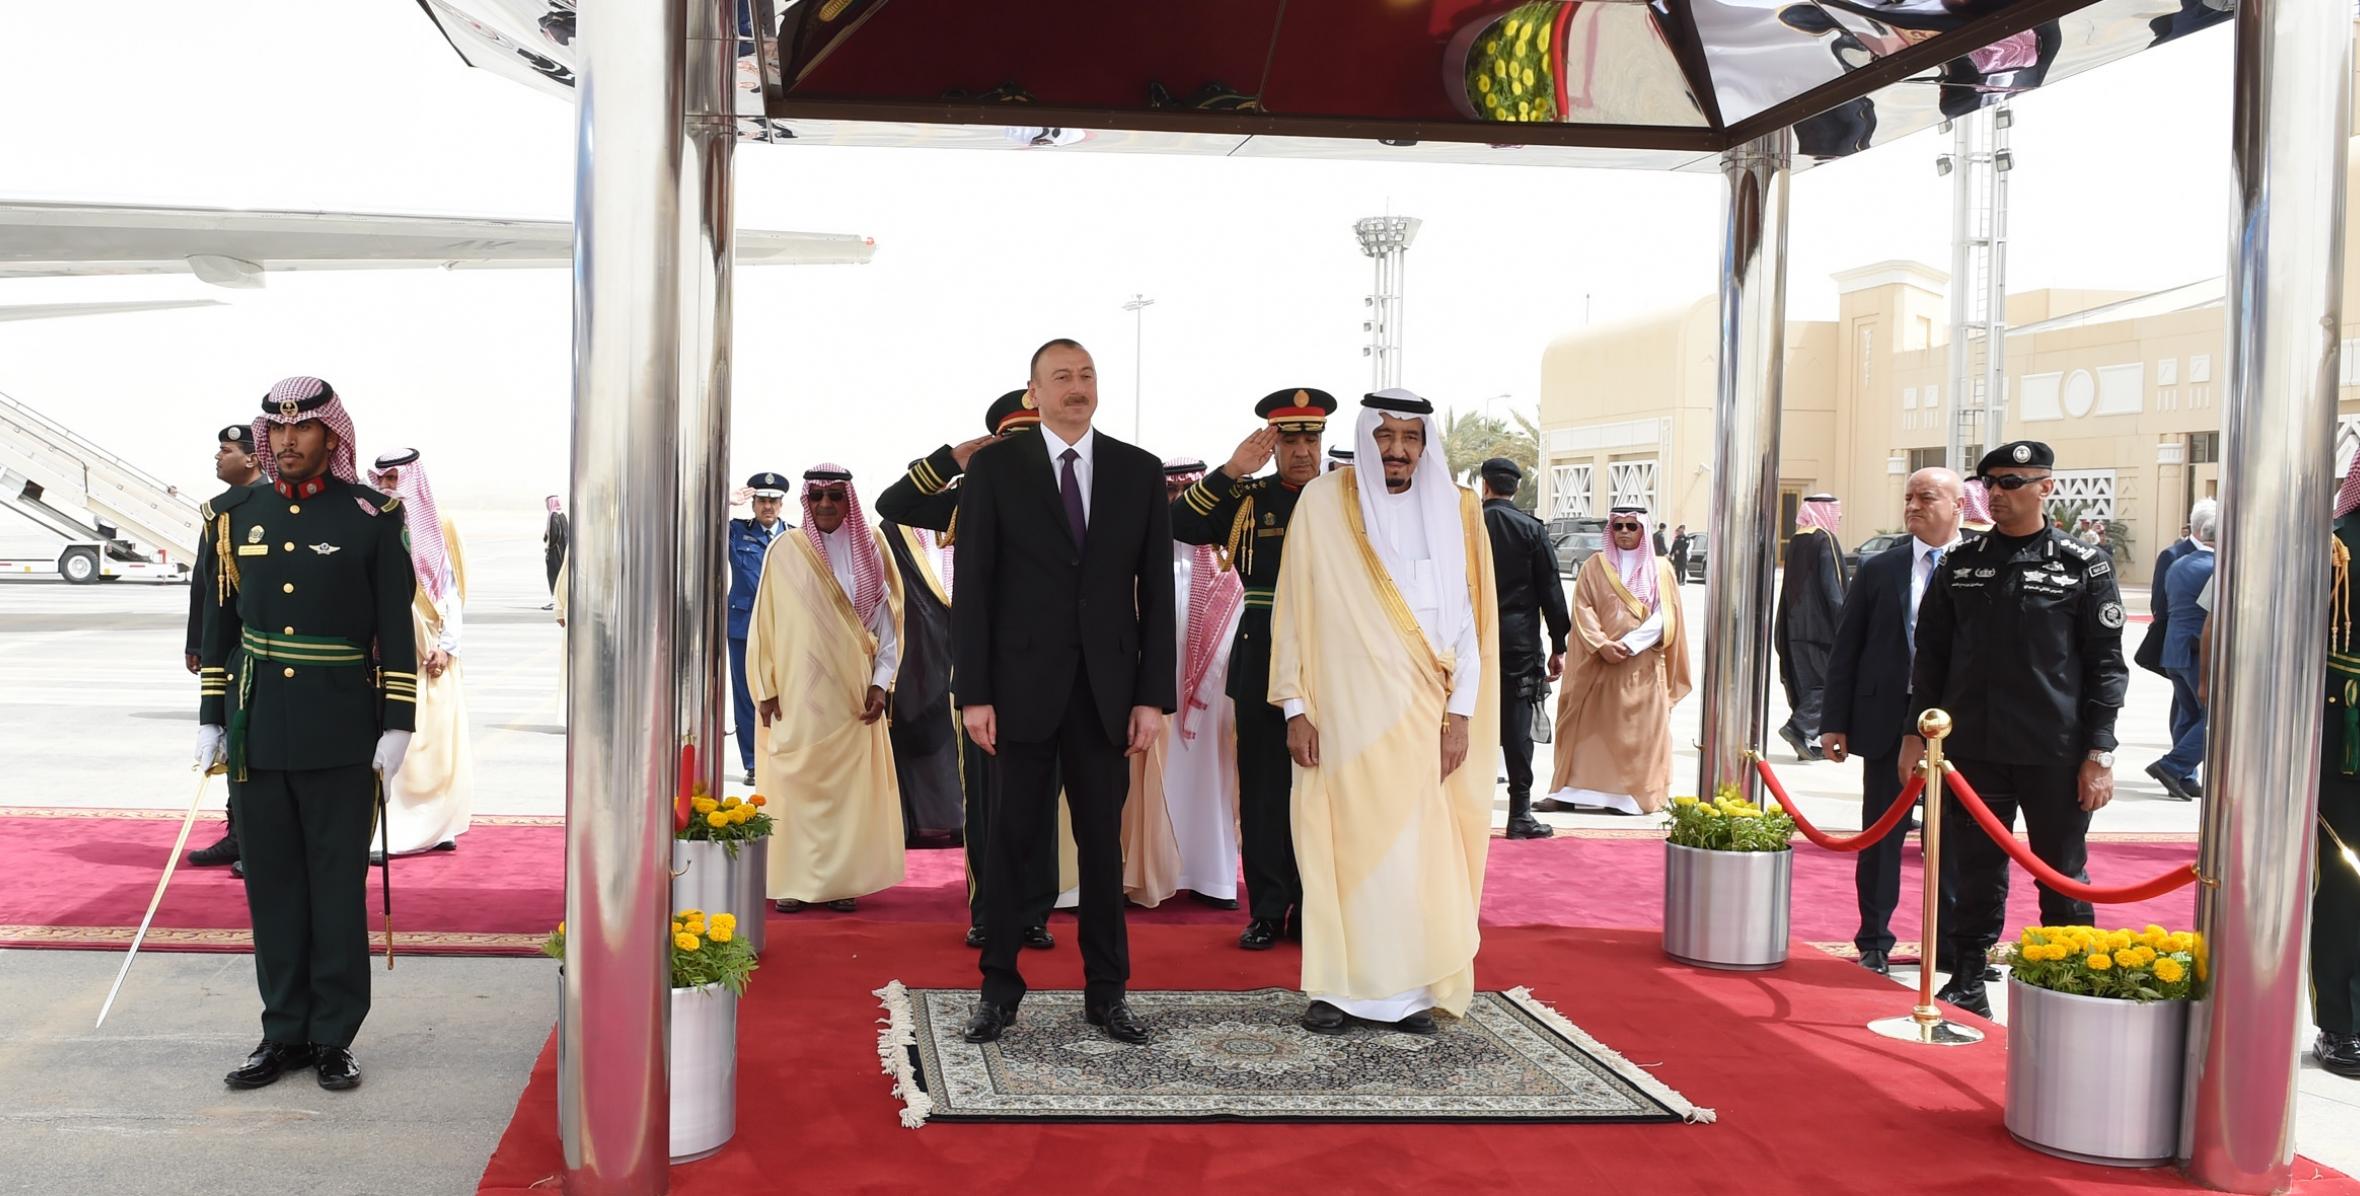 Ilham Aliyev arrived in the Kingdom of Saudi Arabia for an official visit